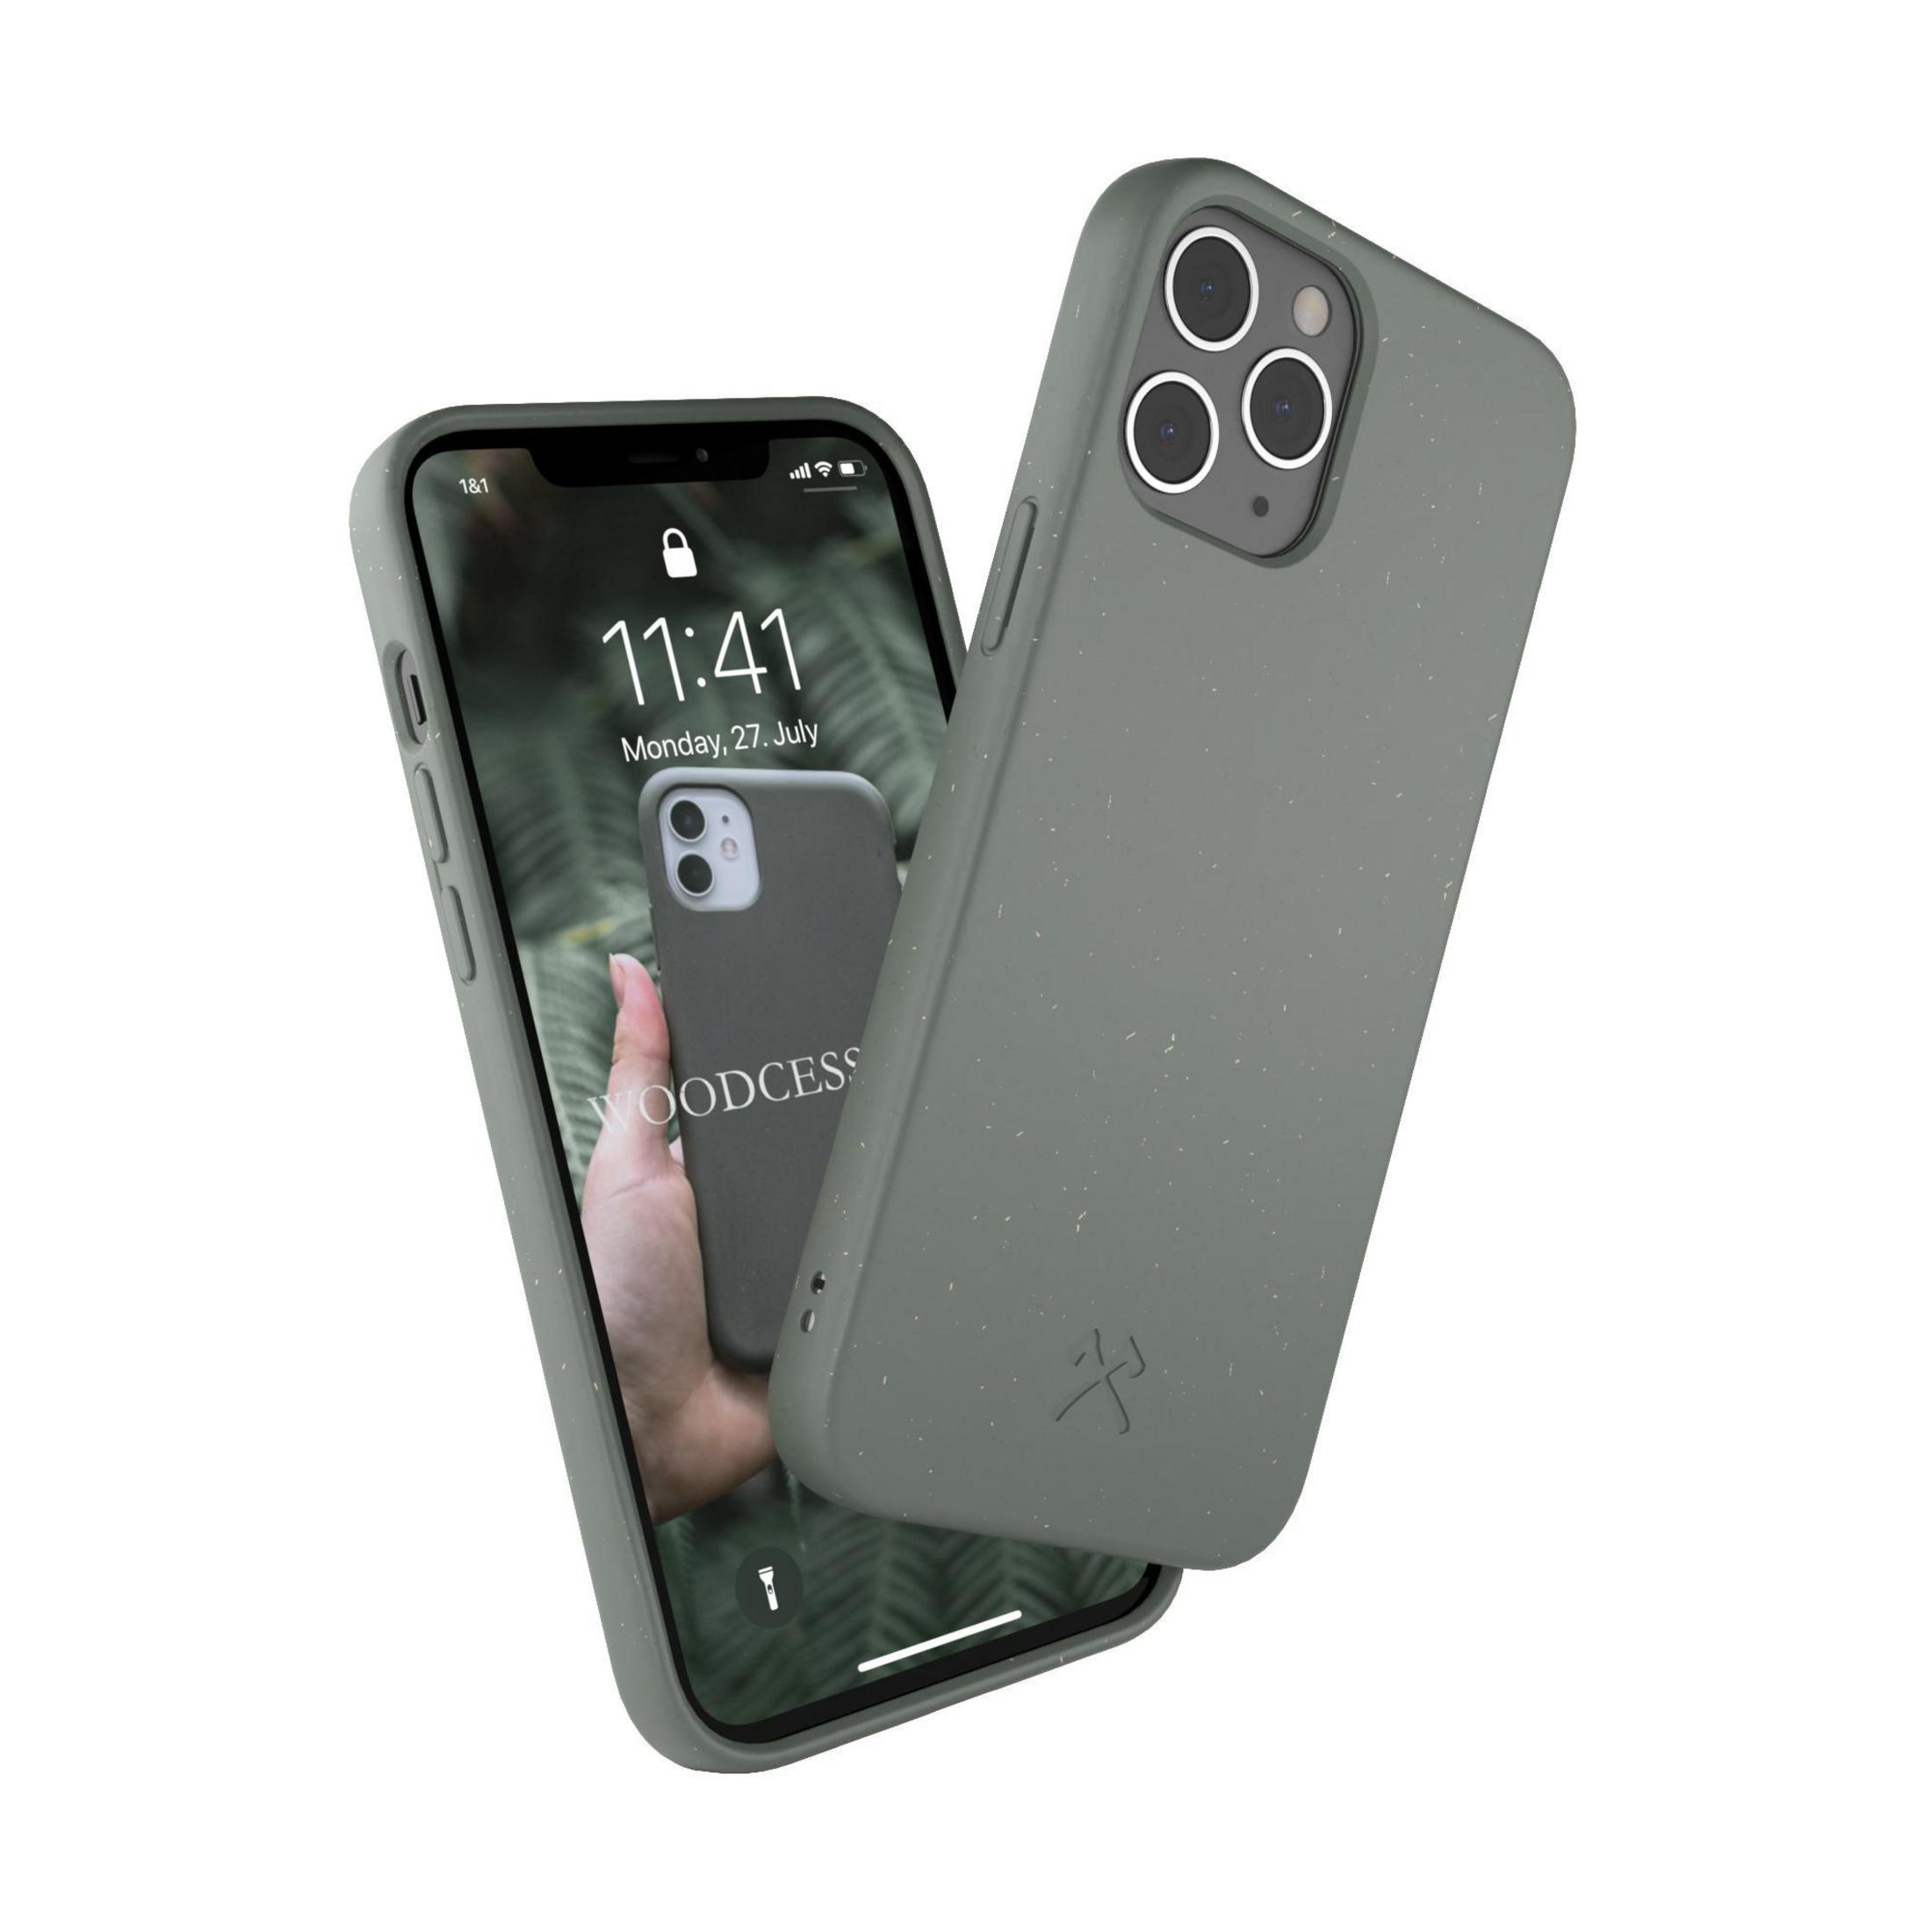 PRO 12 BIO Backcover, Pro, ECO478 WOODCESSORIES 12 GREEN, 12, Grün CLASSIC CASE iPhone 12 iPhone Apple, IP